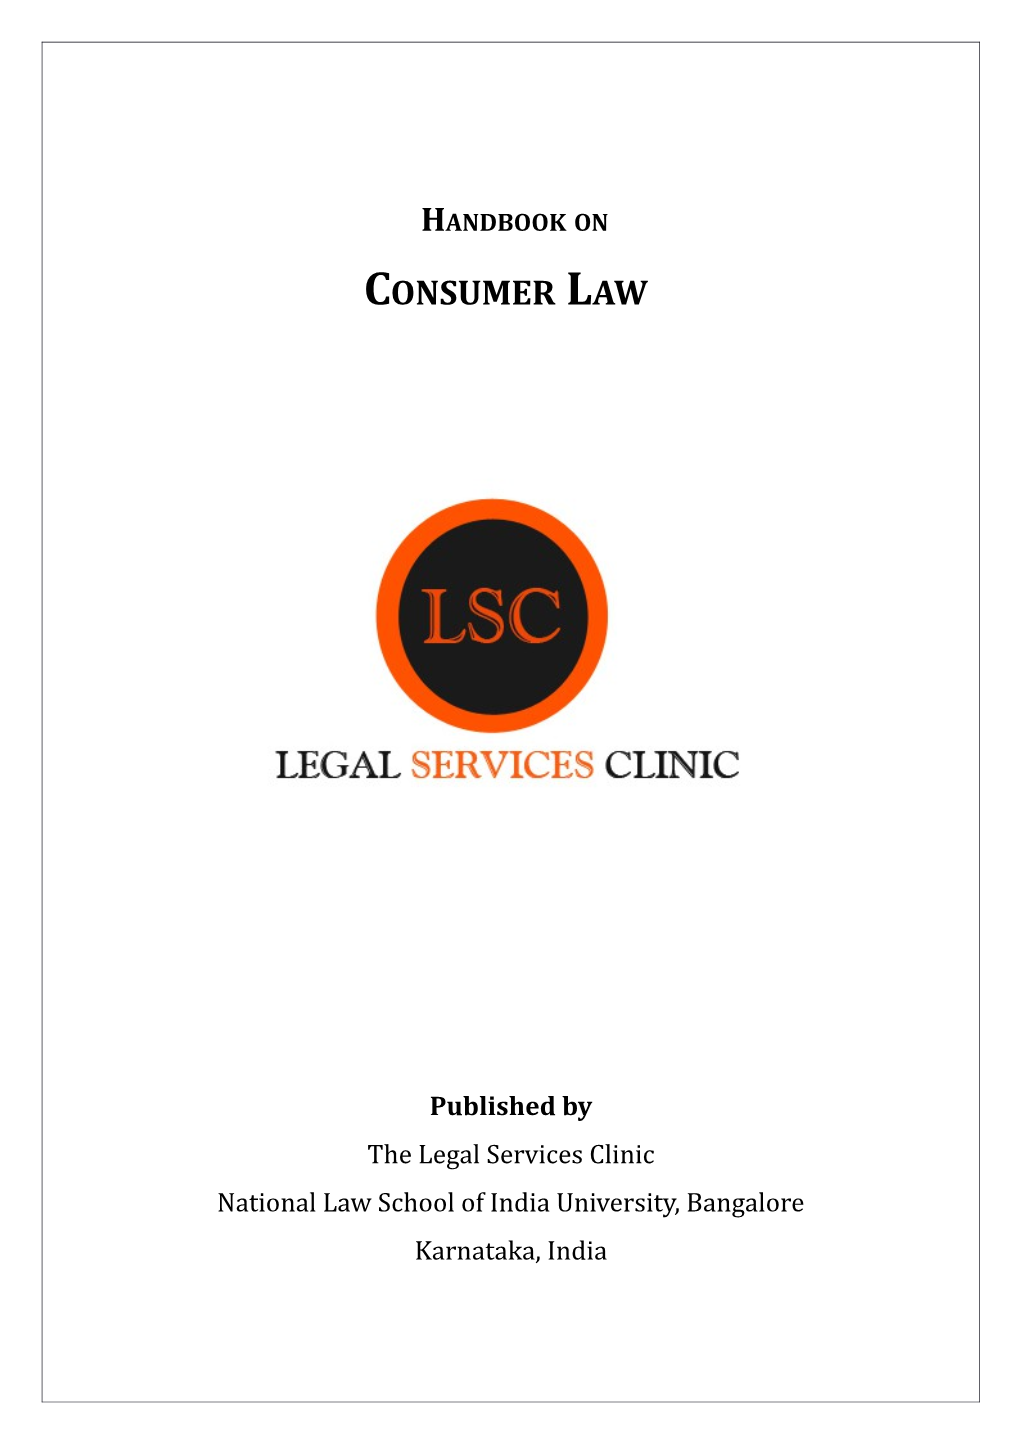 The Legal Services Clinic